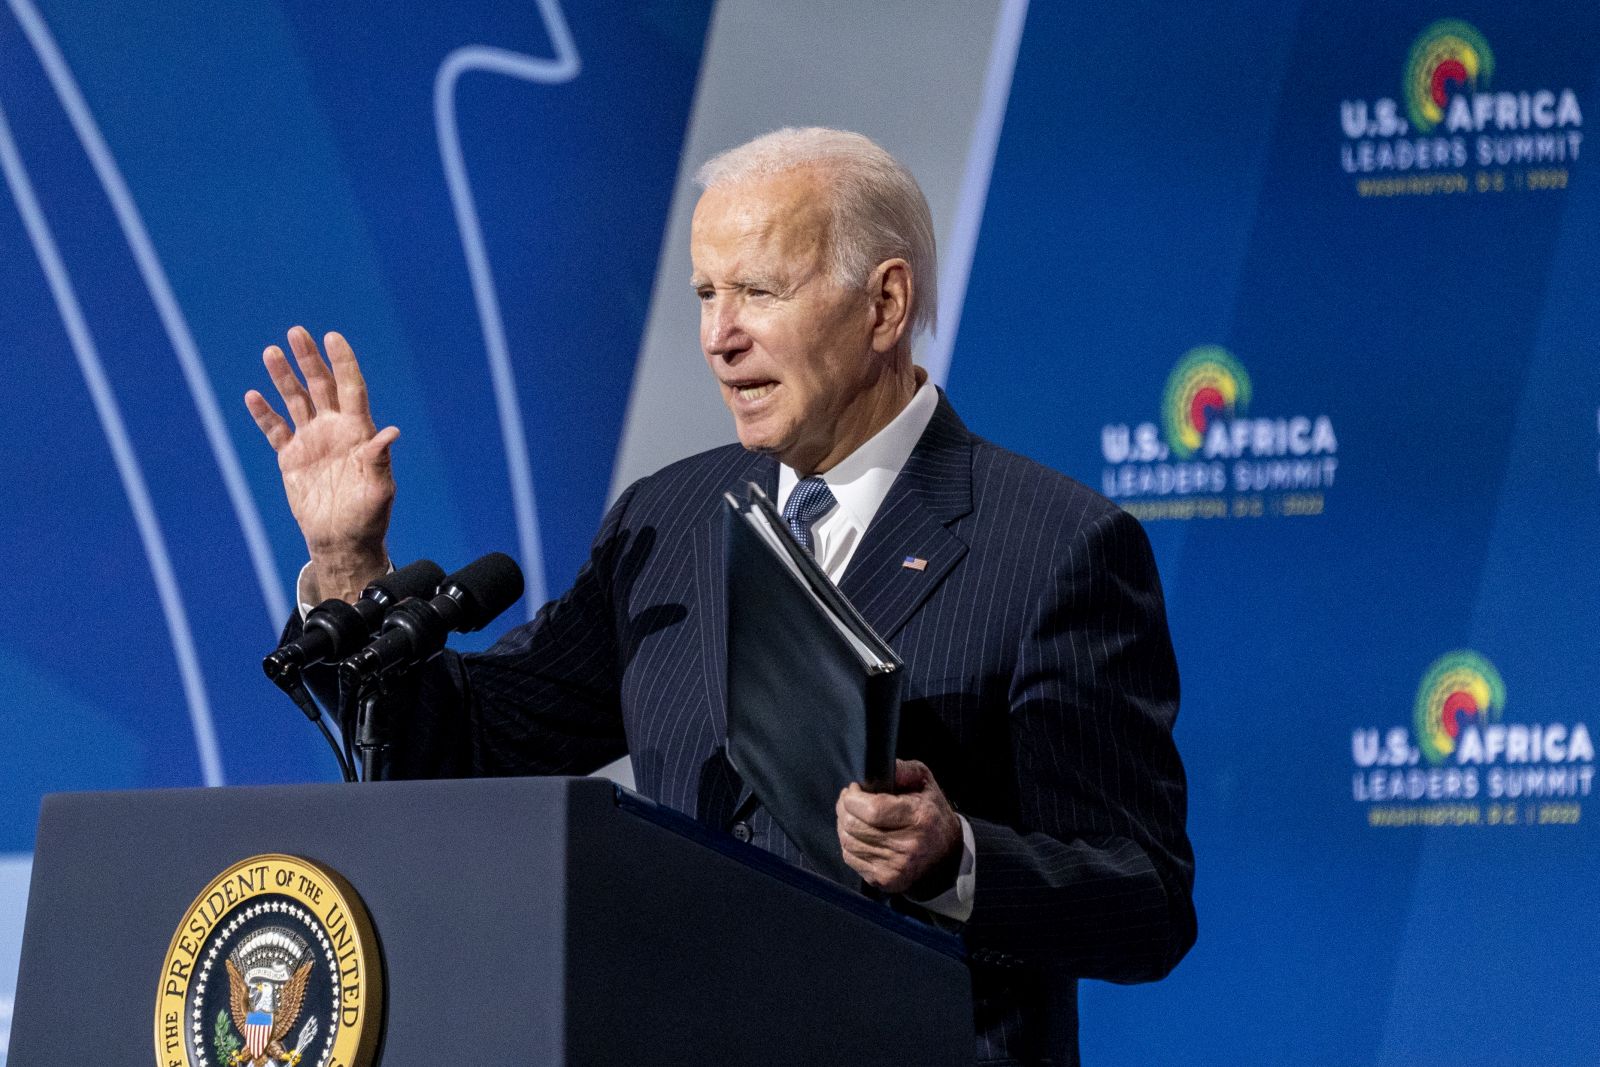 epa10365985 US President Joe Biden delivers remarks during the U.S. Africa Leaders Summit at the Walter E. Washington Convention Center in Washington, DC, USA, 14 December 2022. The U.S-Africa Leaders Summit brings together heads of state, government officials, business leaders, and civil society to strengthen ties between the U.S. and Africa.  EPA/SHAWN THEW